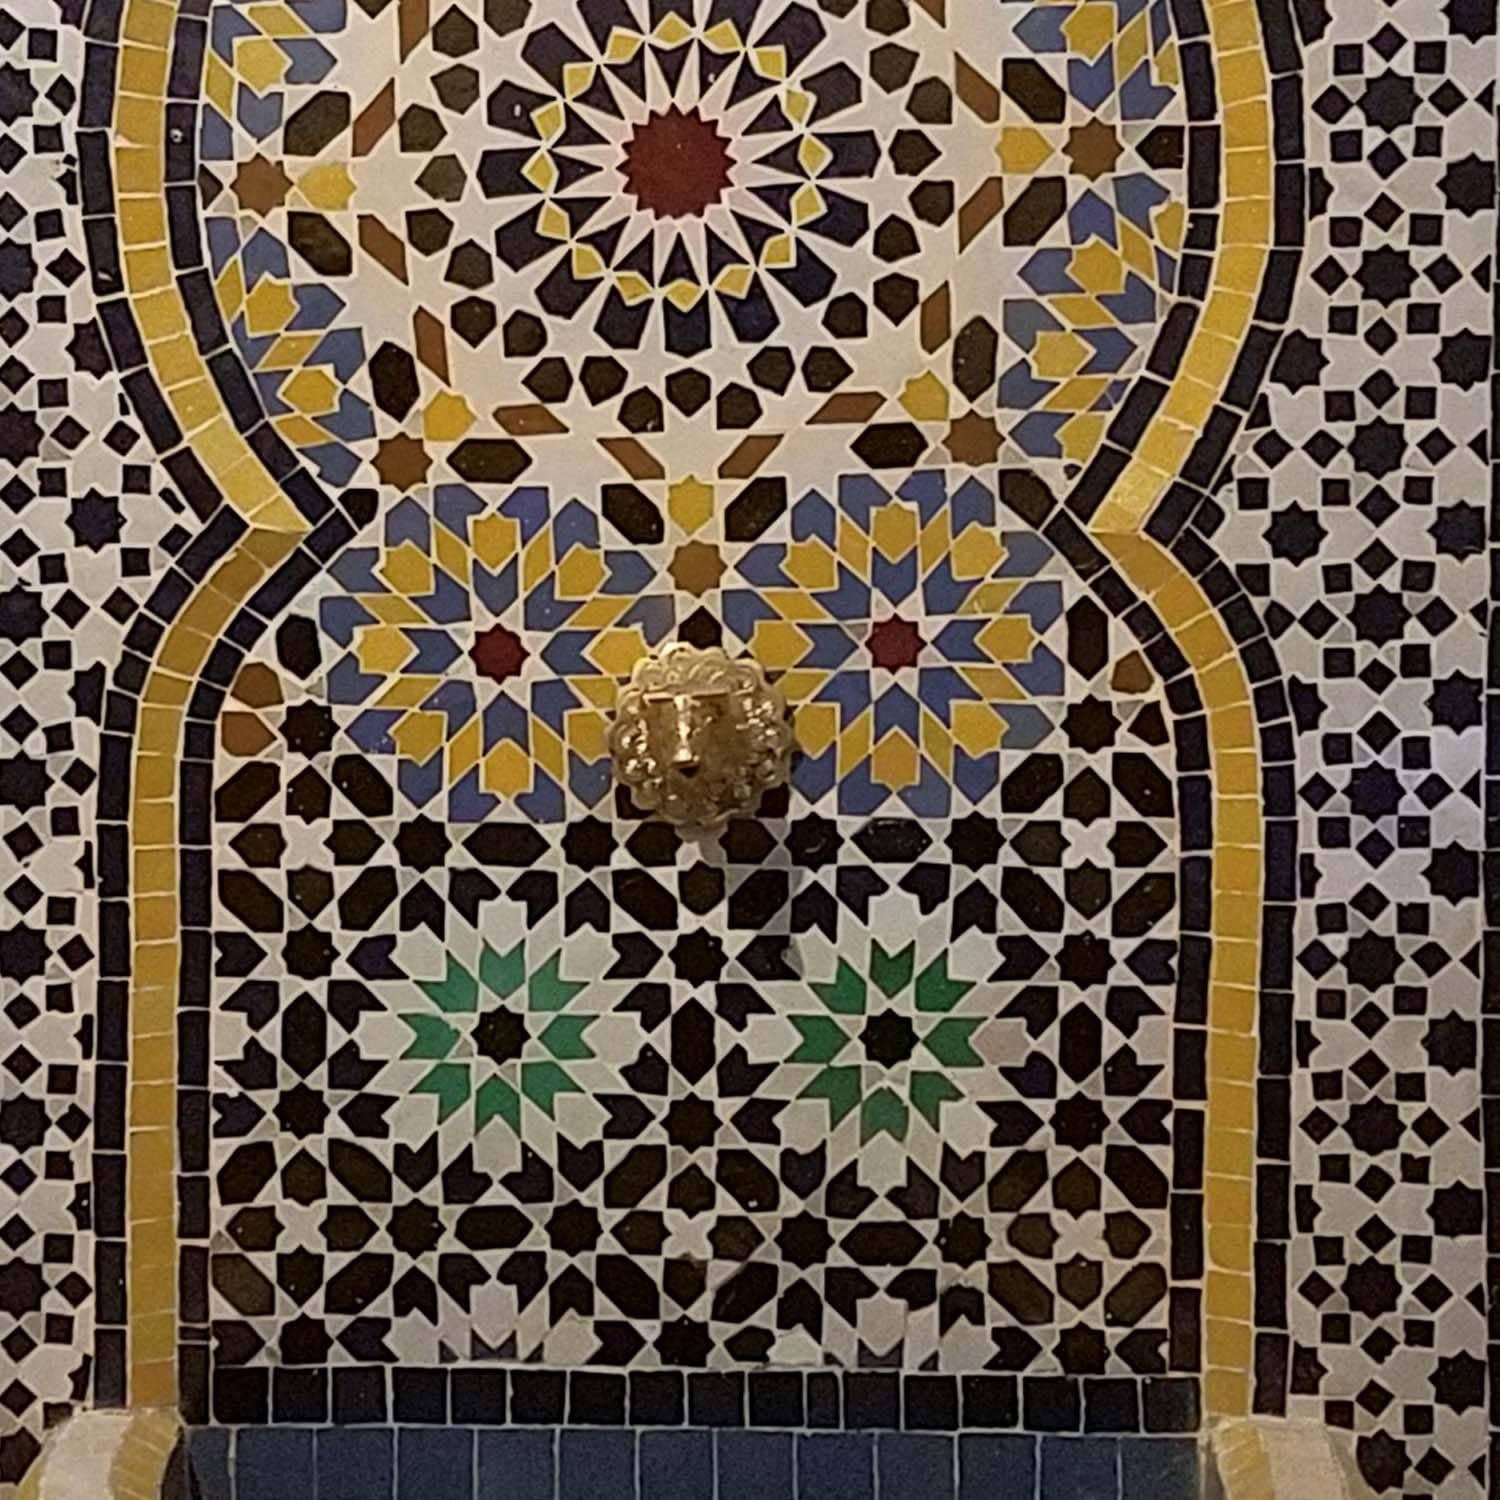 Contemporary Meknes Moroccan Mosaic Fountain, All Mosaics For Sale